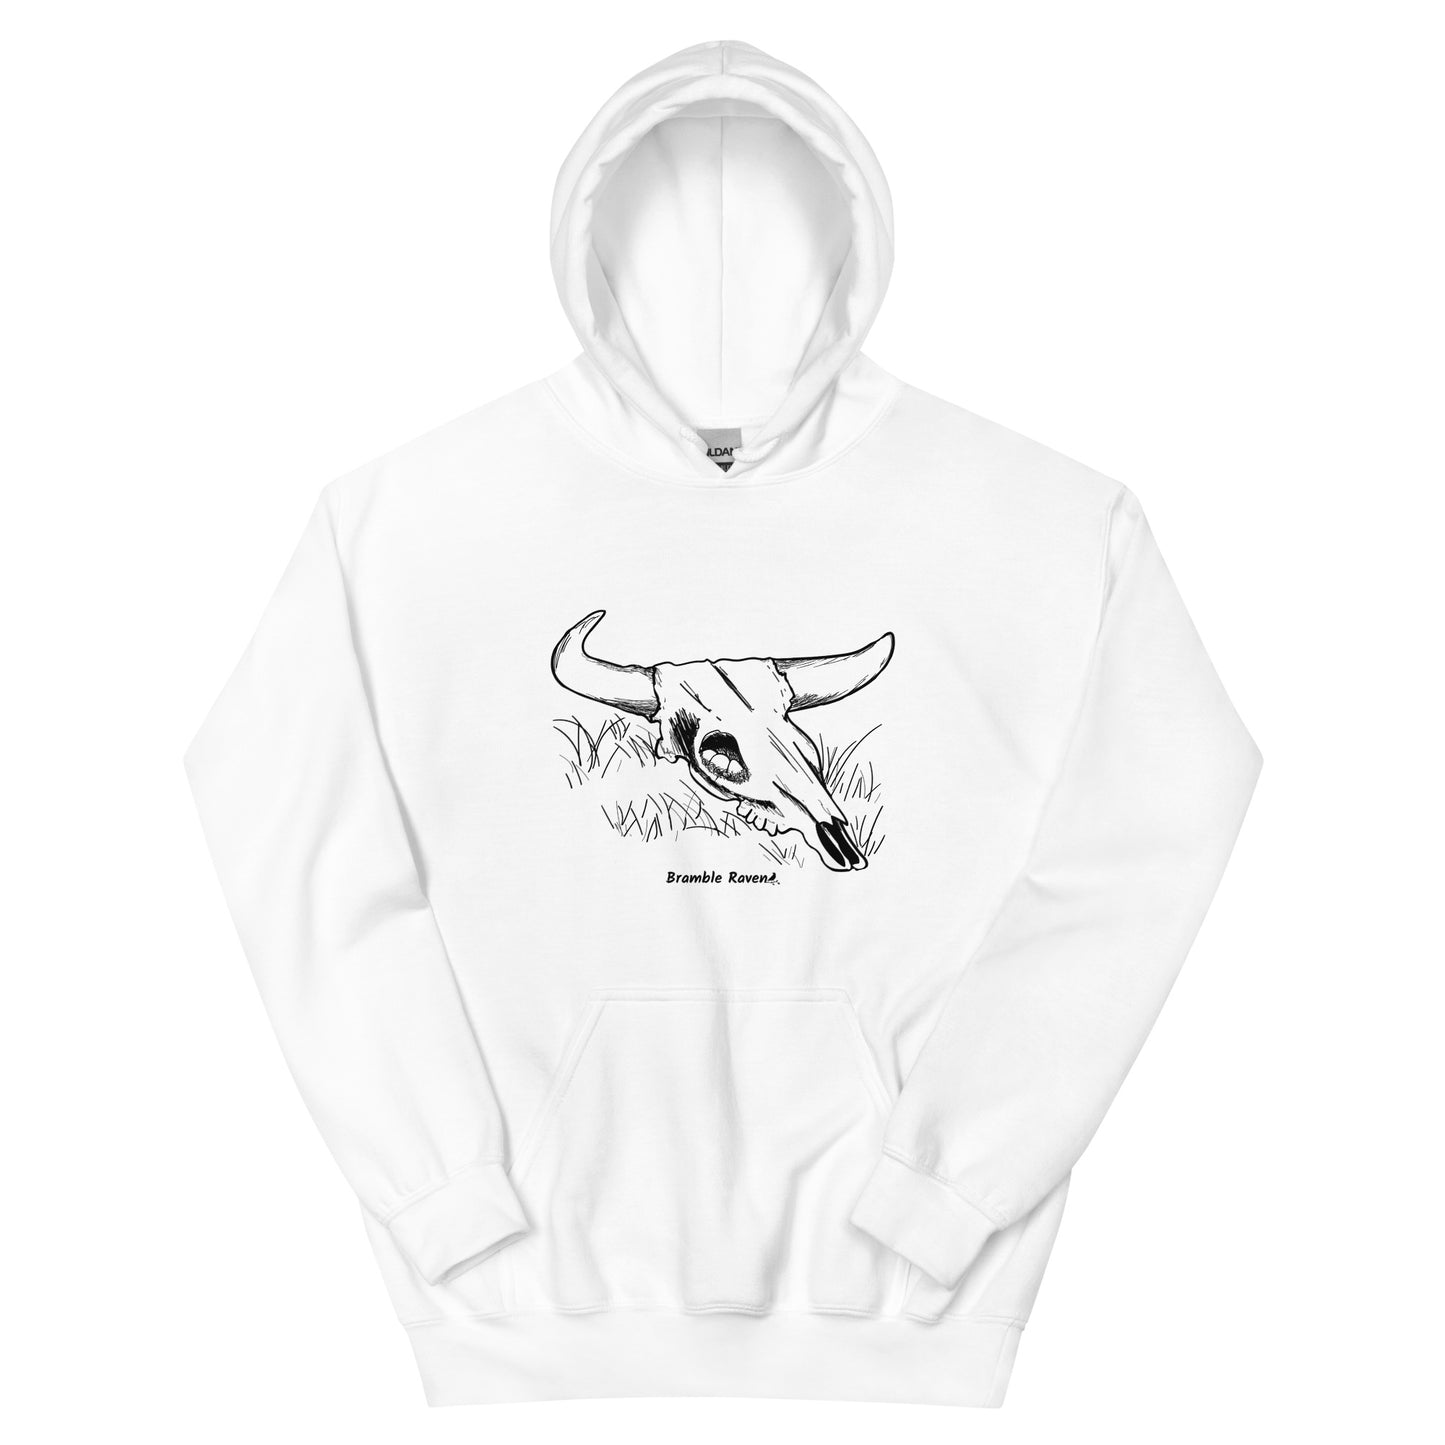 White colored unisex hoodie. Front has image of a cow skull cradling a bird nest. Features double-lined hood and front pouch pocket.